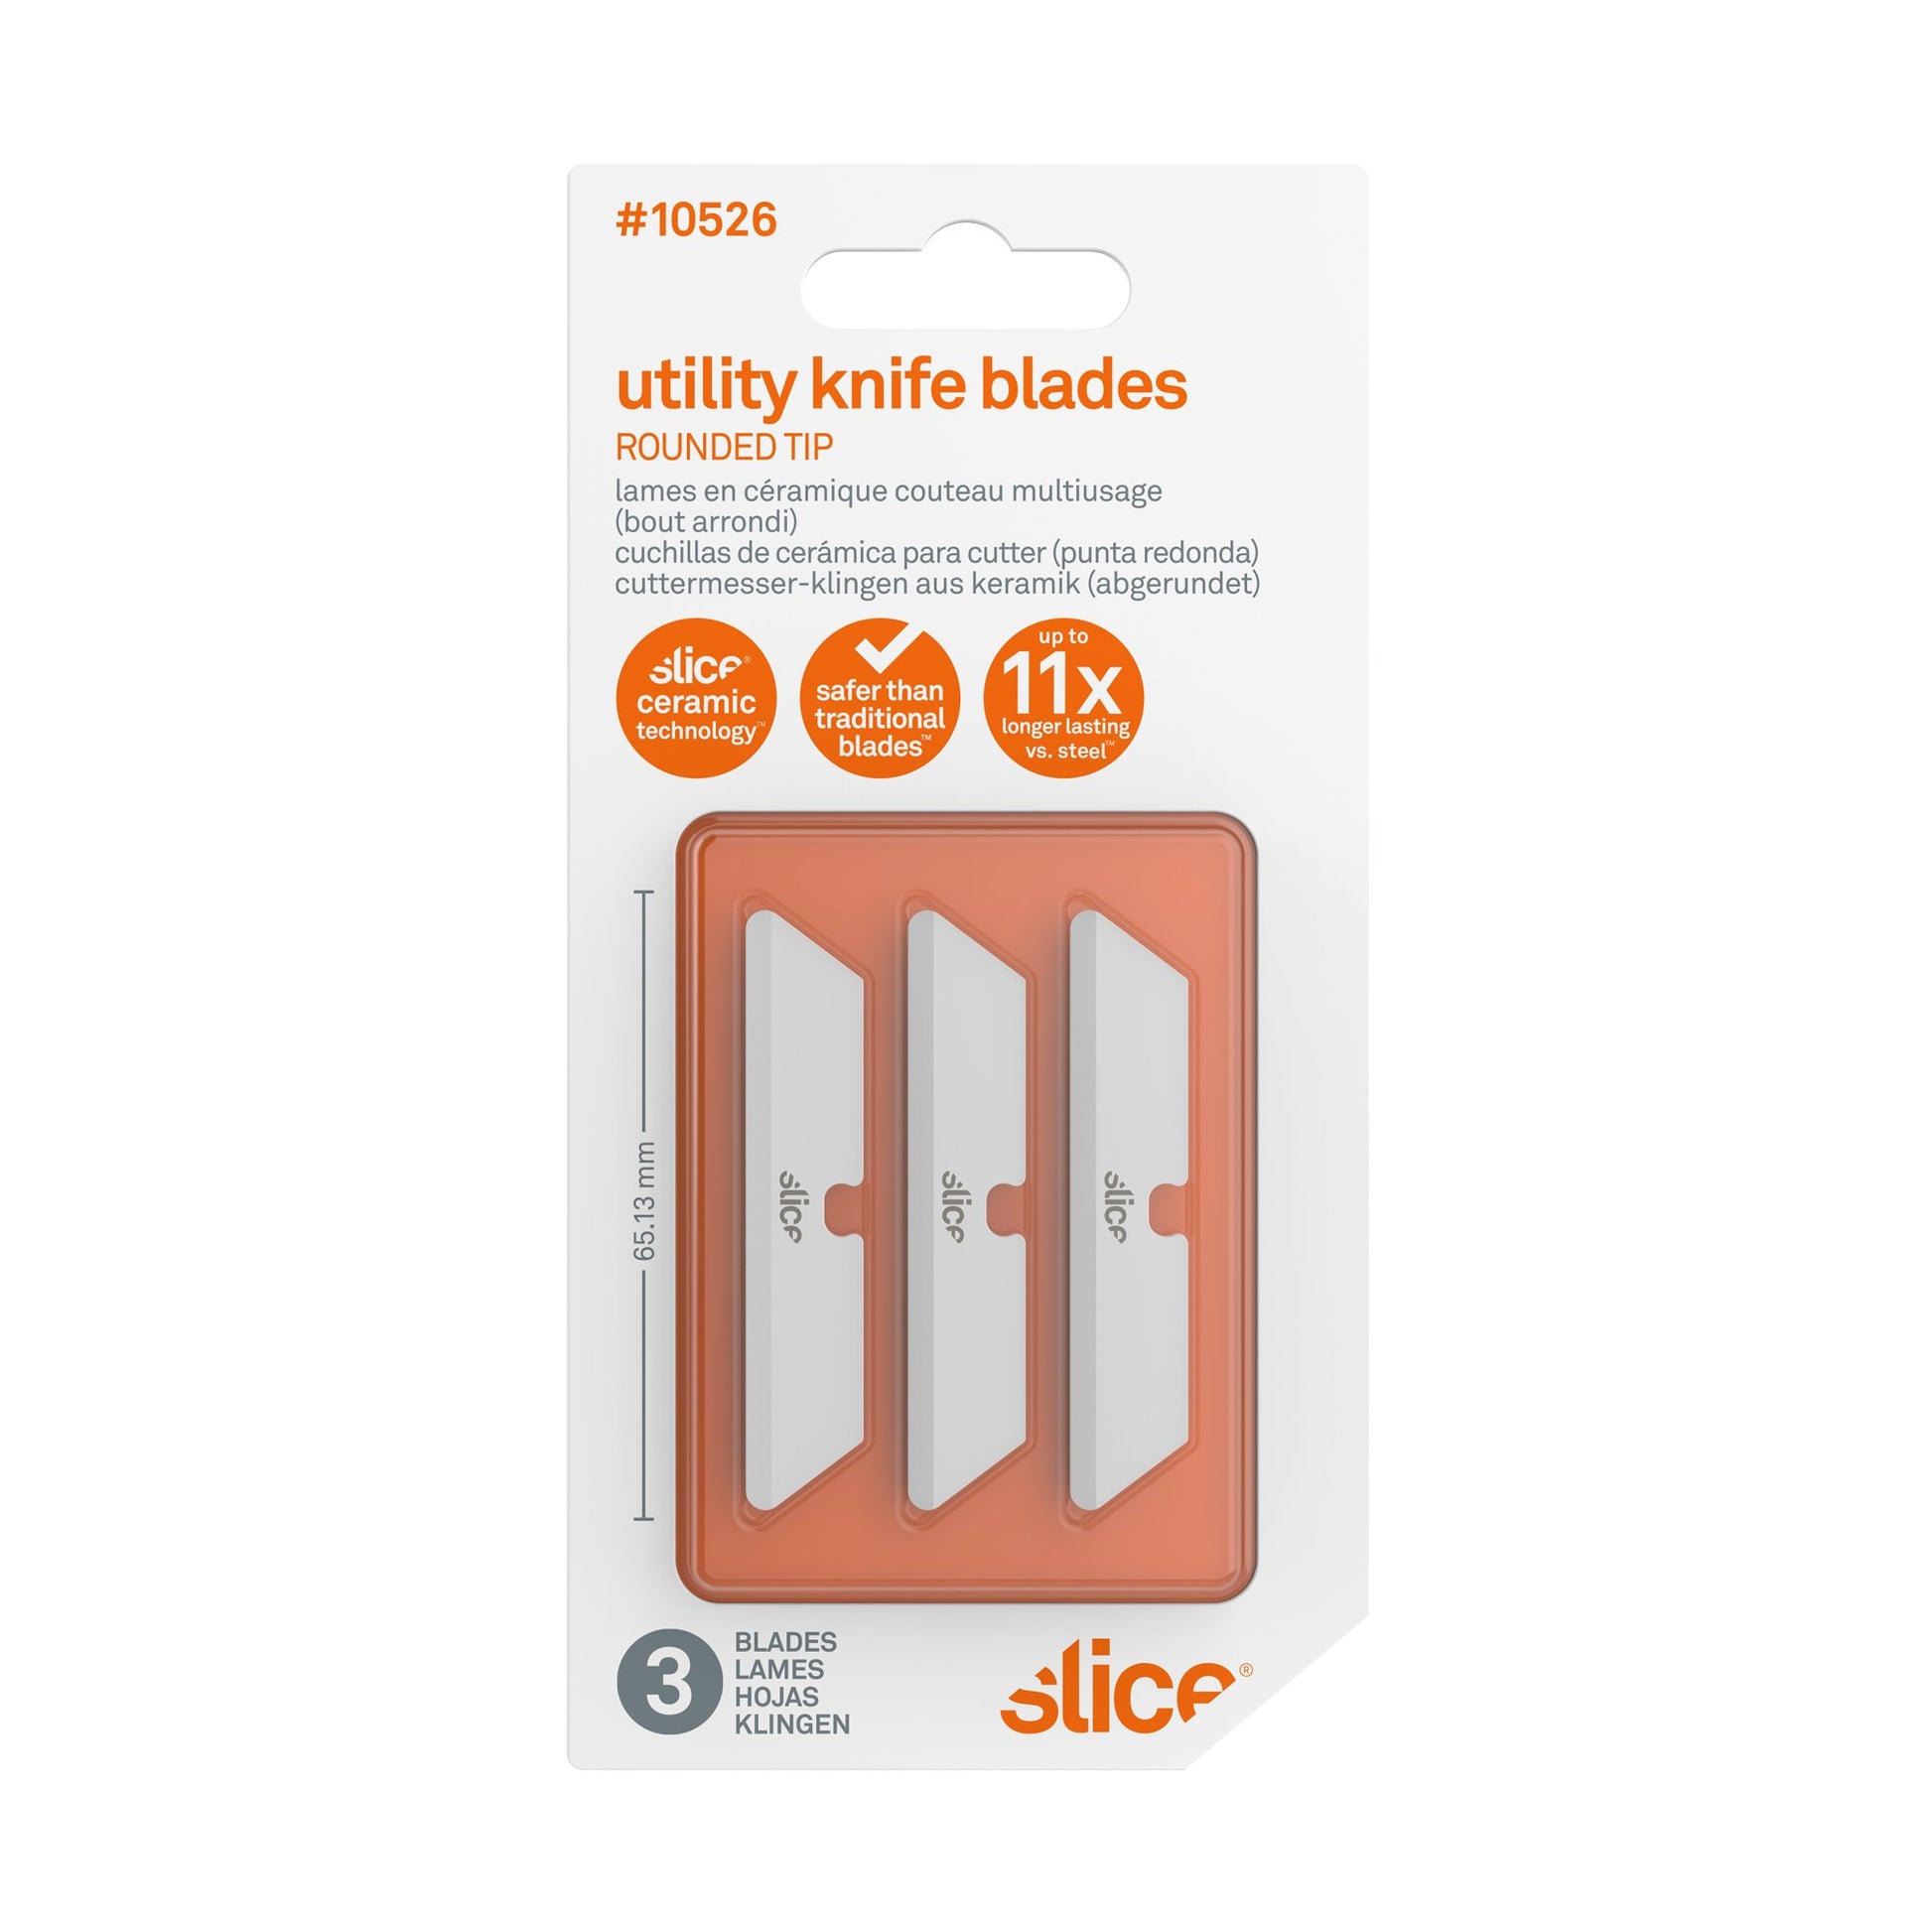 Slice Safety Blades Type: Rounded tip, Includes: 4 dual-sided box cutter